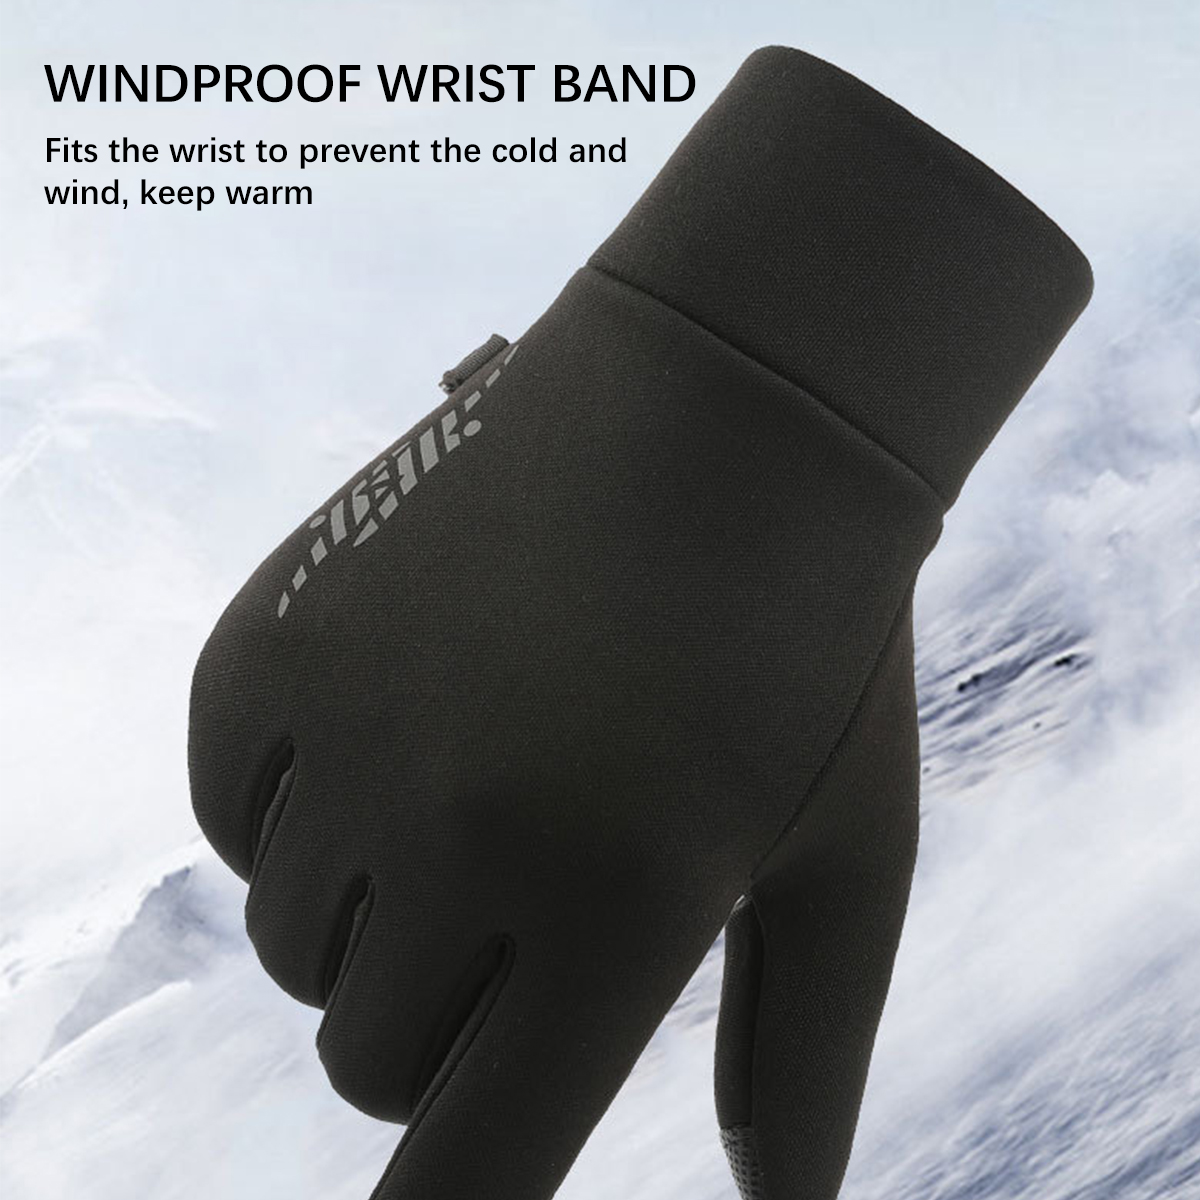 Winter-Warm-Touch-Screen-Thermal-Gloves-Ski-Snow-Snowboard-Cycling-Waterproof-Windproof-Gloves-1923176-6